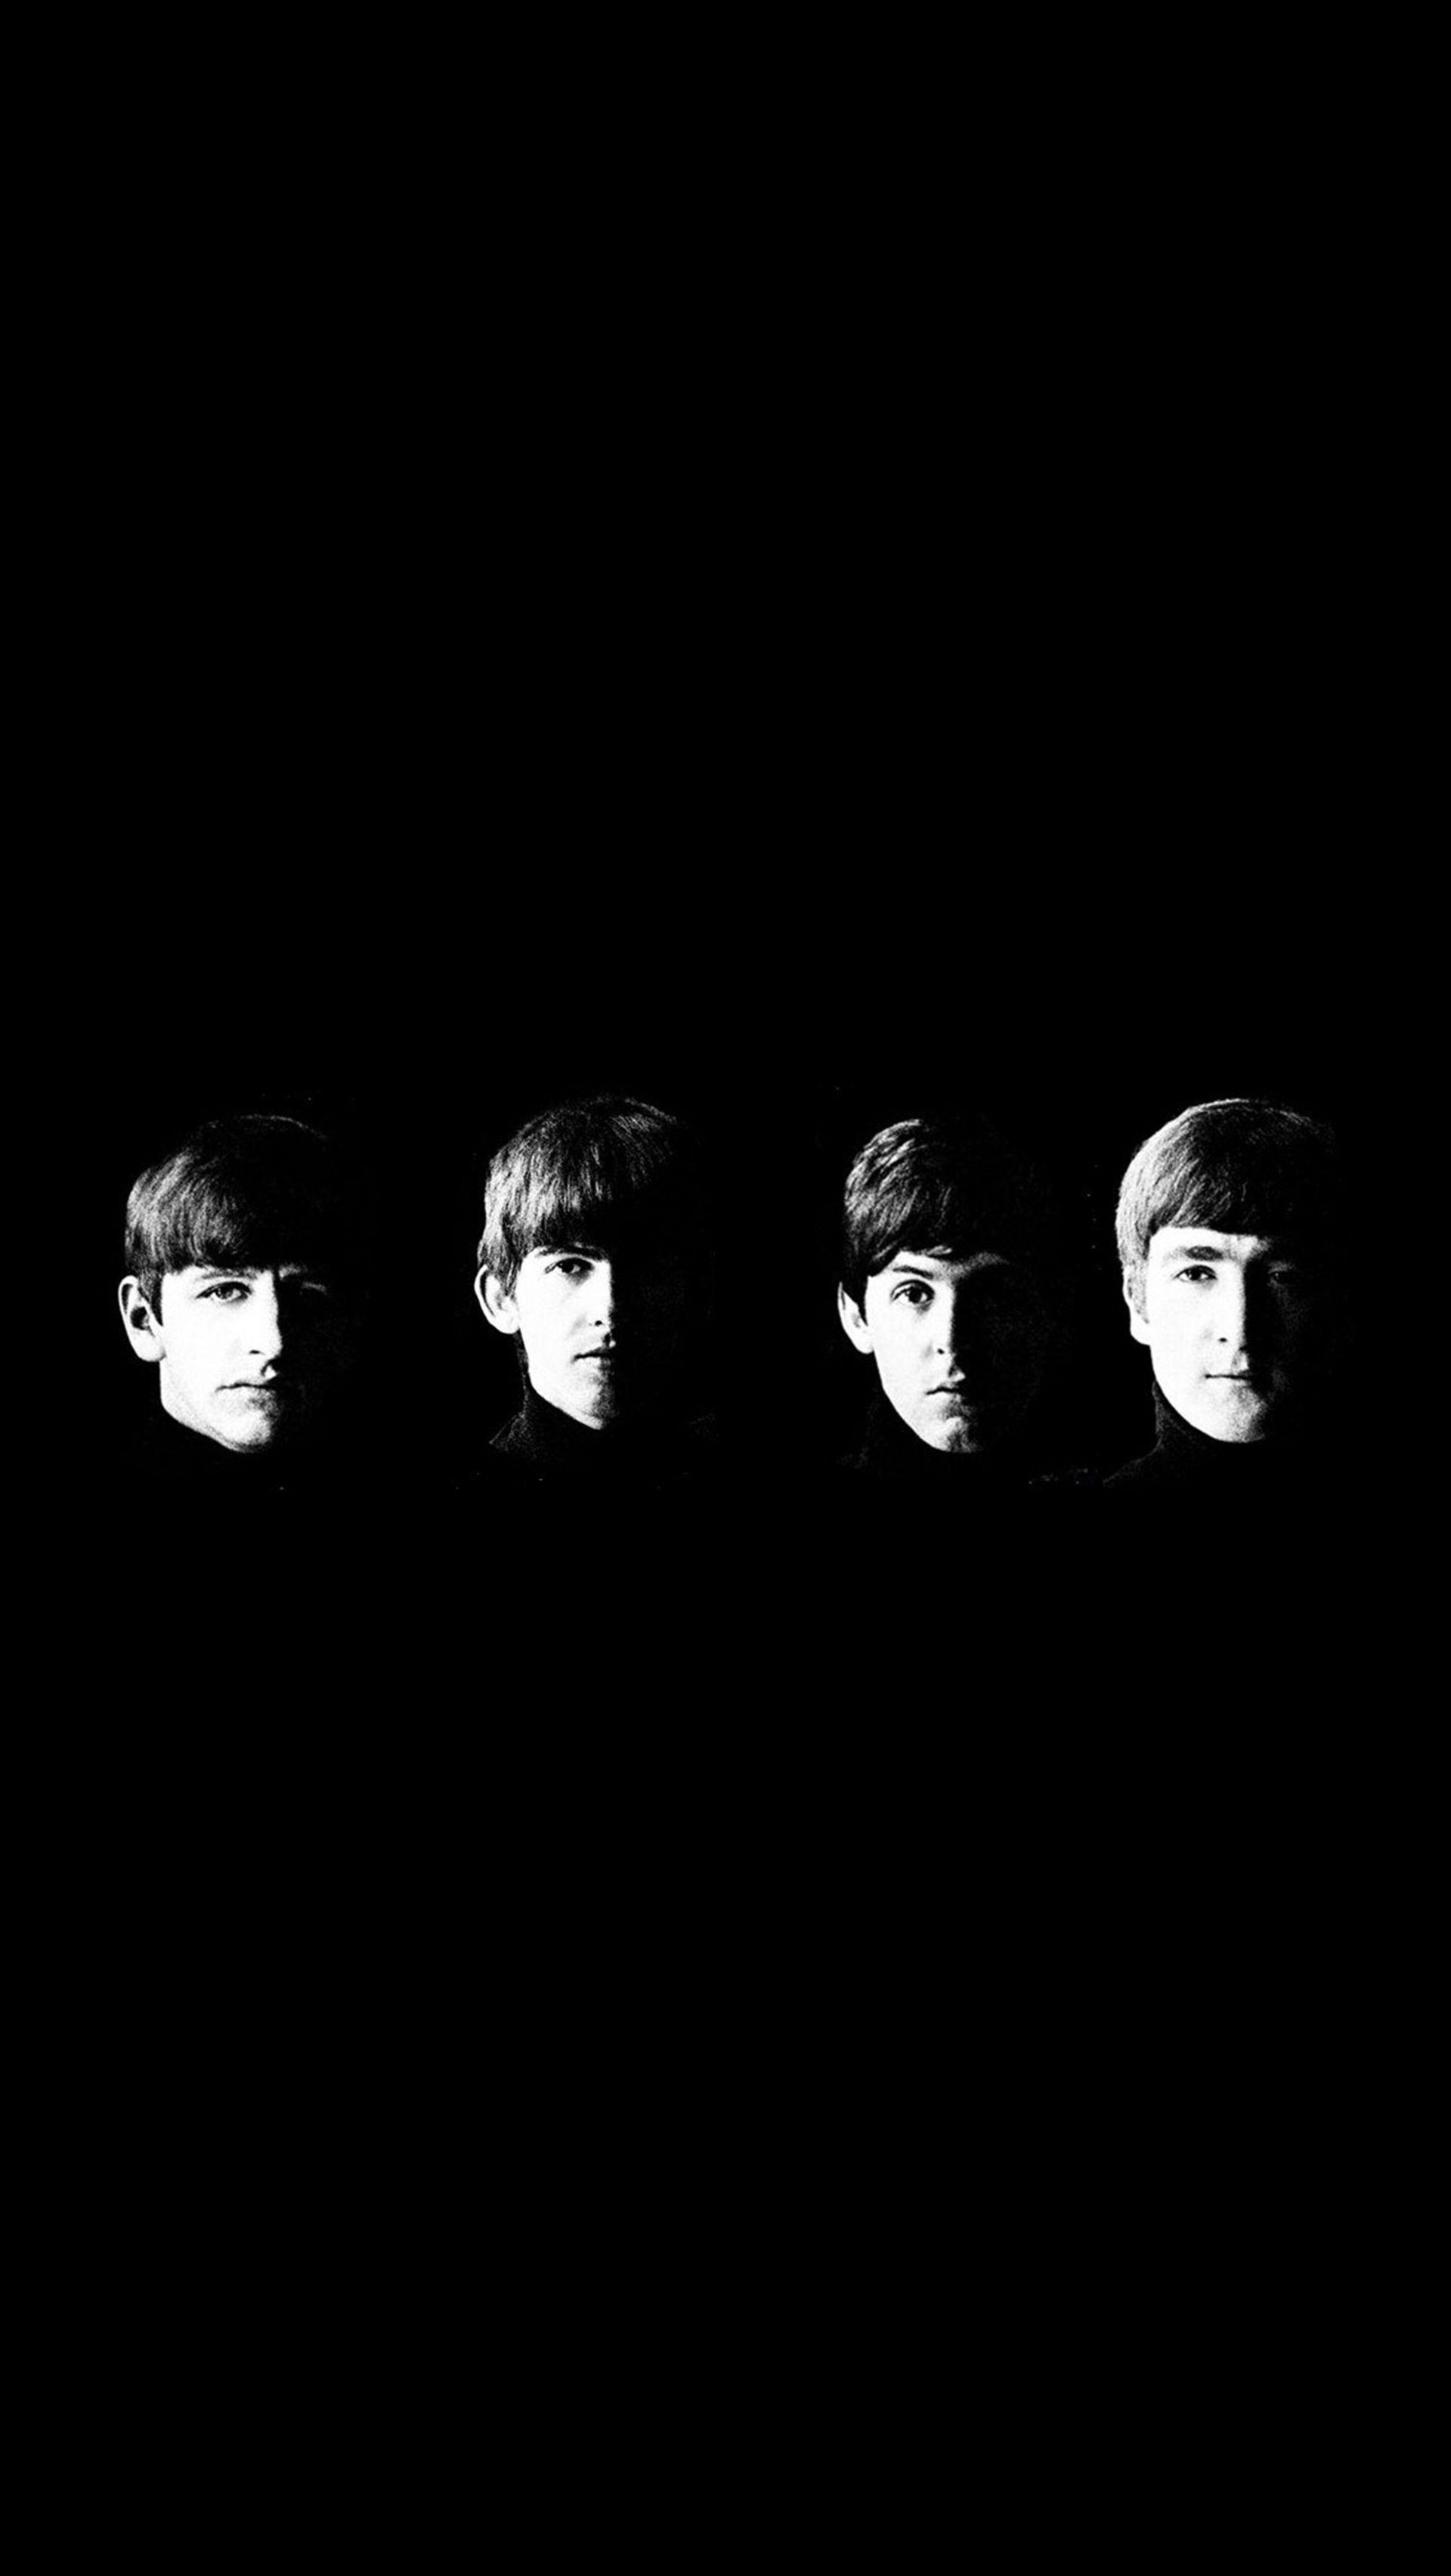 The Beatles Wallpaper Iphone Hotsell GET 52 OFF wwwislandcrematoriumie